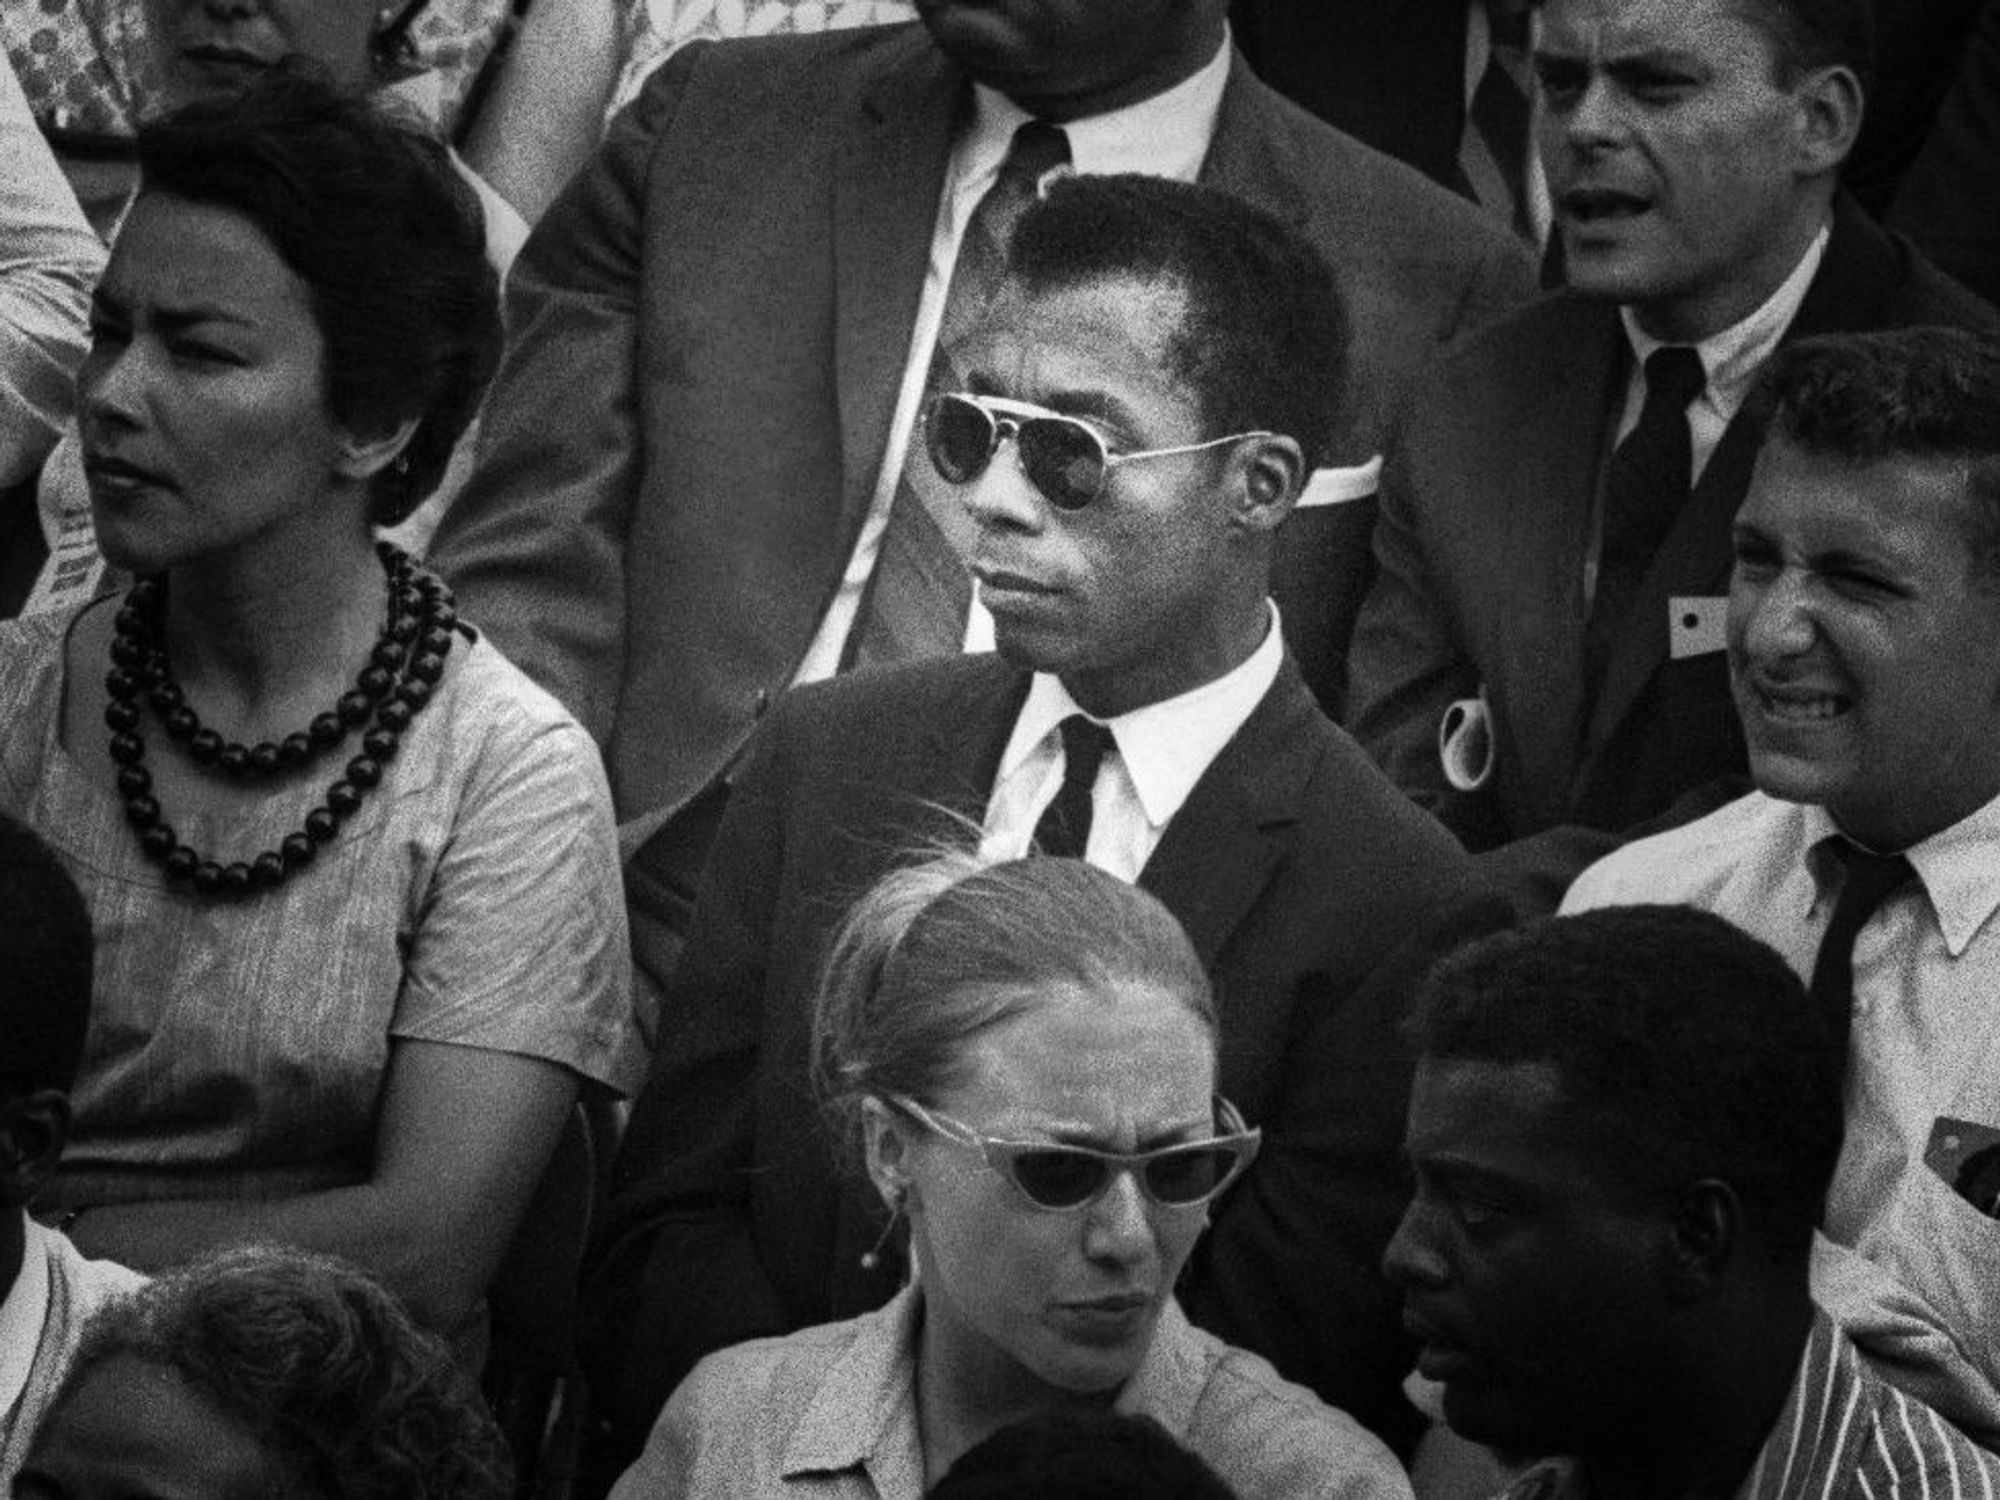 Raoul Peck’s, 'I Am Not Your Negro,' Is a Must-Watch In the Wake of George Floyd’s Murder